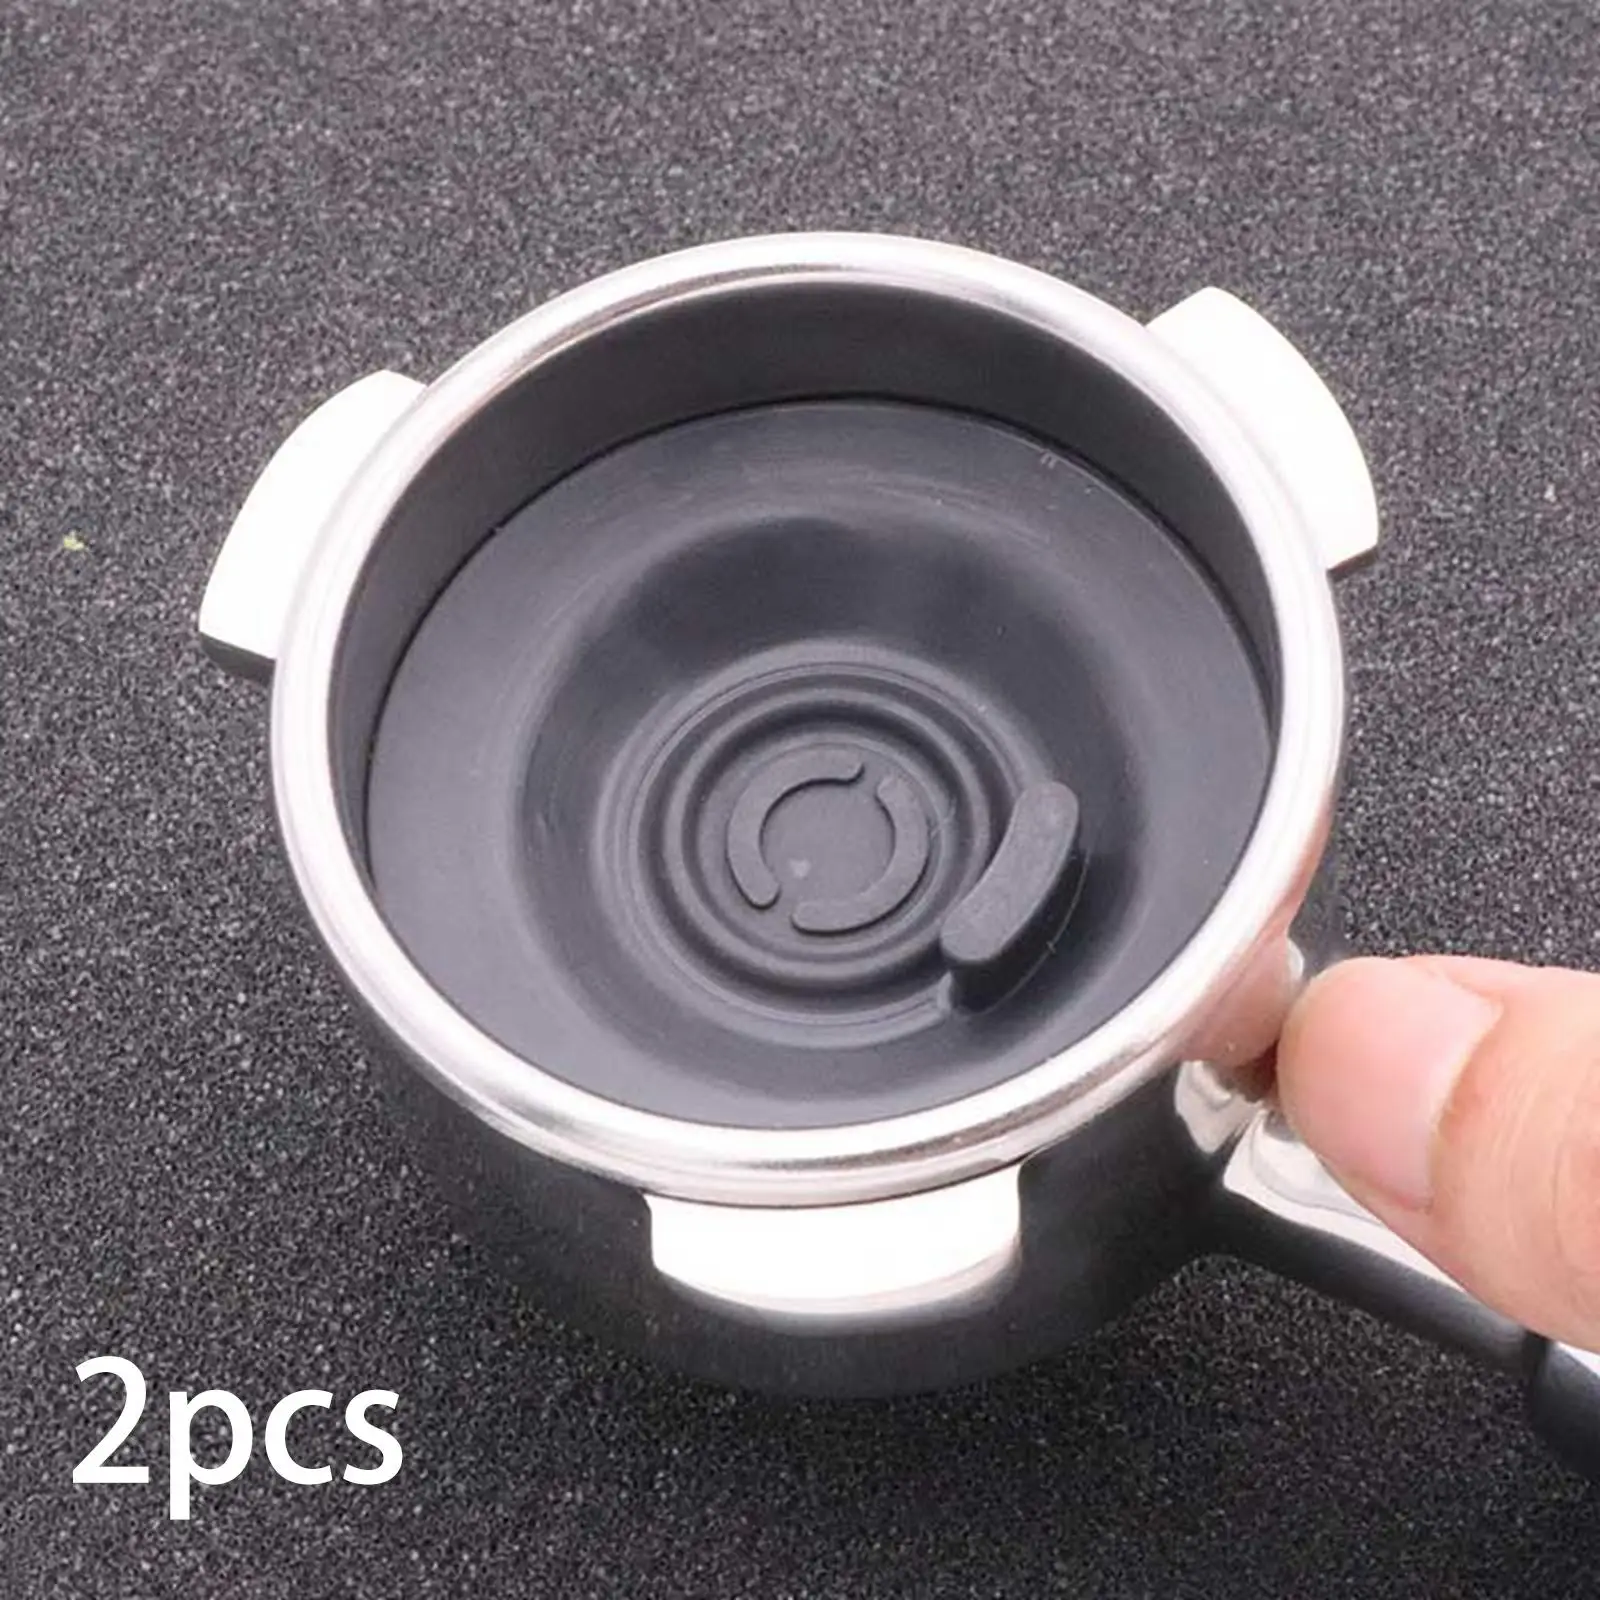 2Pcs Coffee Machine Blanking Disc Replacement Spare Coffee Backflush Disk Parts for Bes870XL Bes878bss Bes880 Espresso Makers